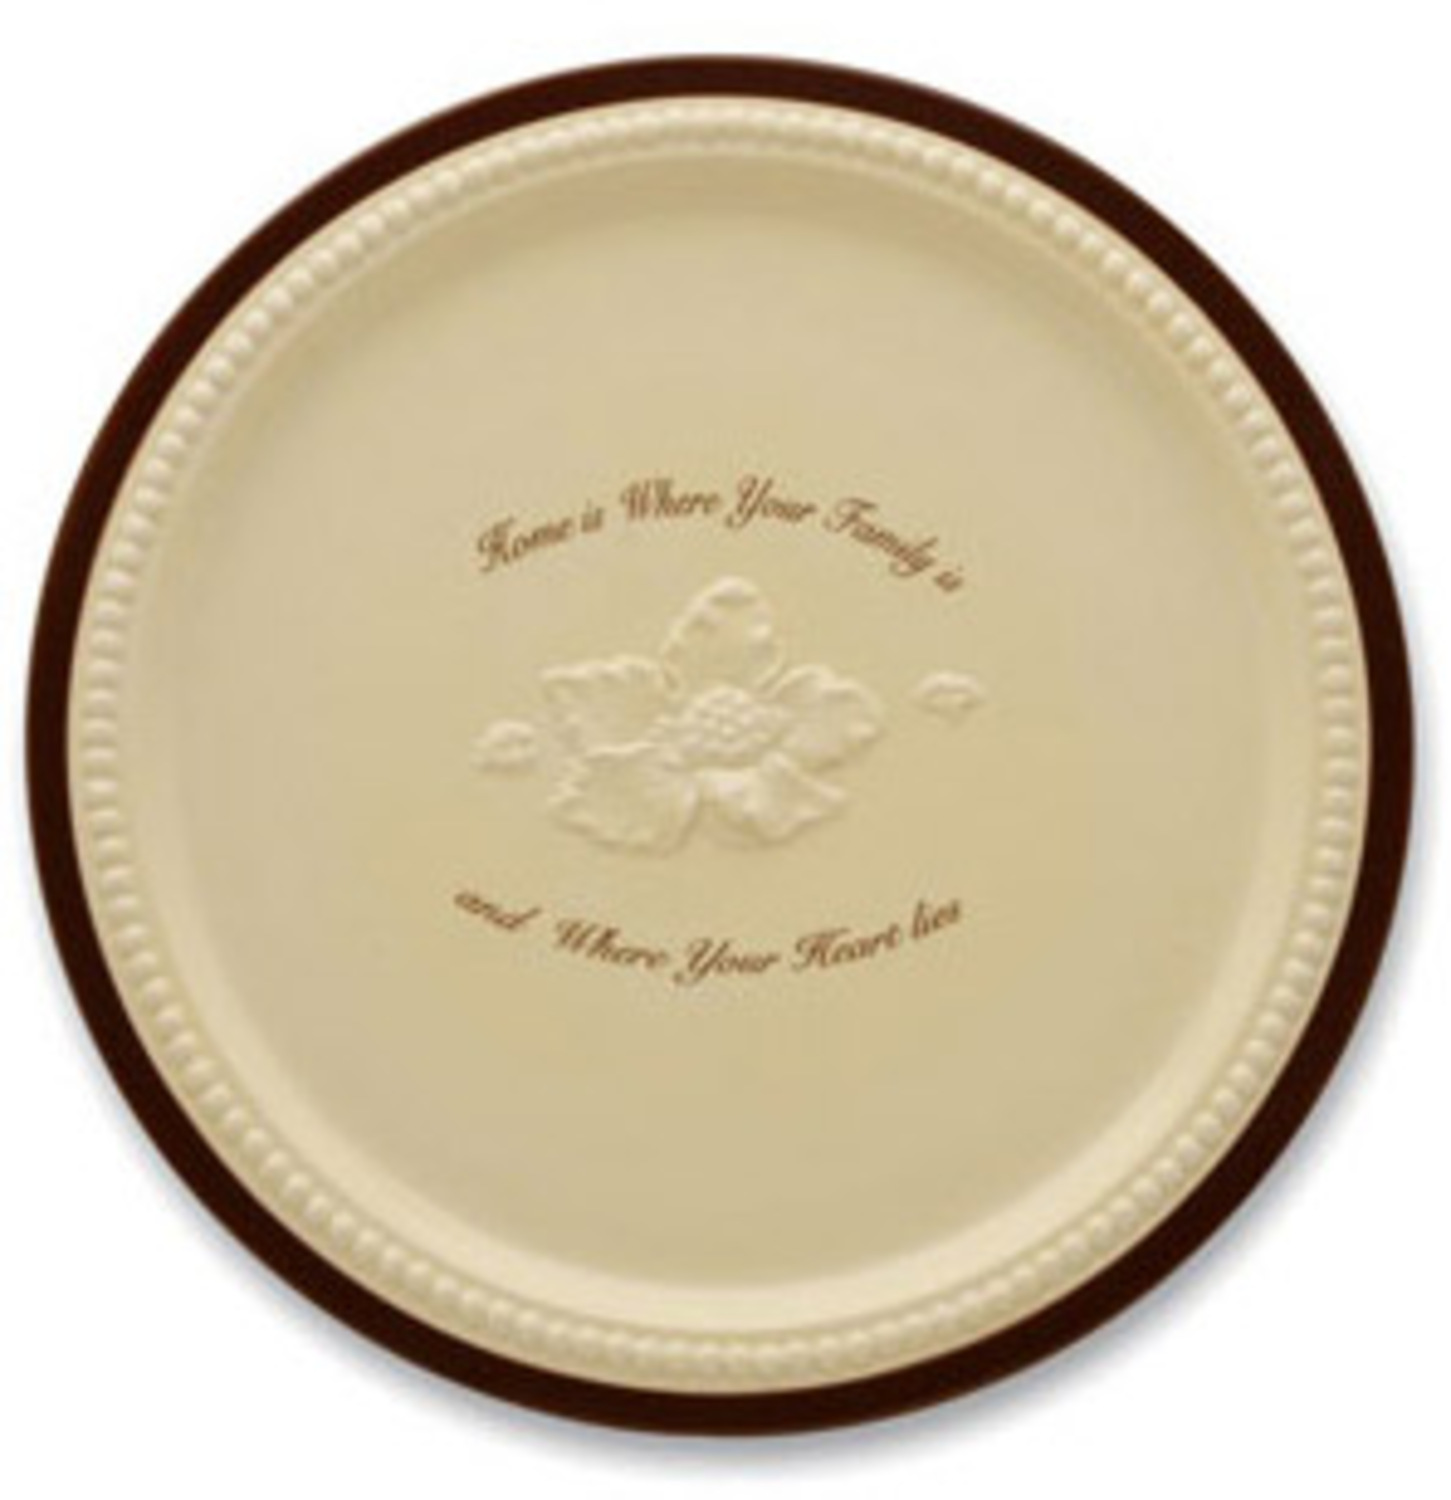 Family & Home by Shared Blessings - Family & Home - 11" Round Dinner Plate (Set of 2)